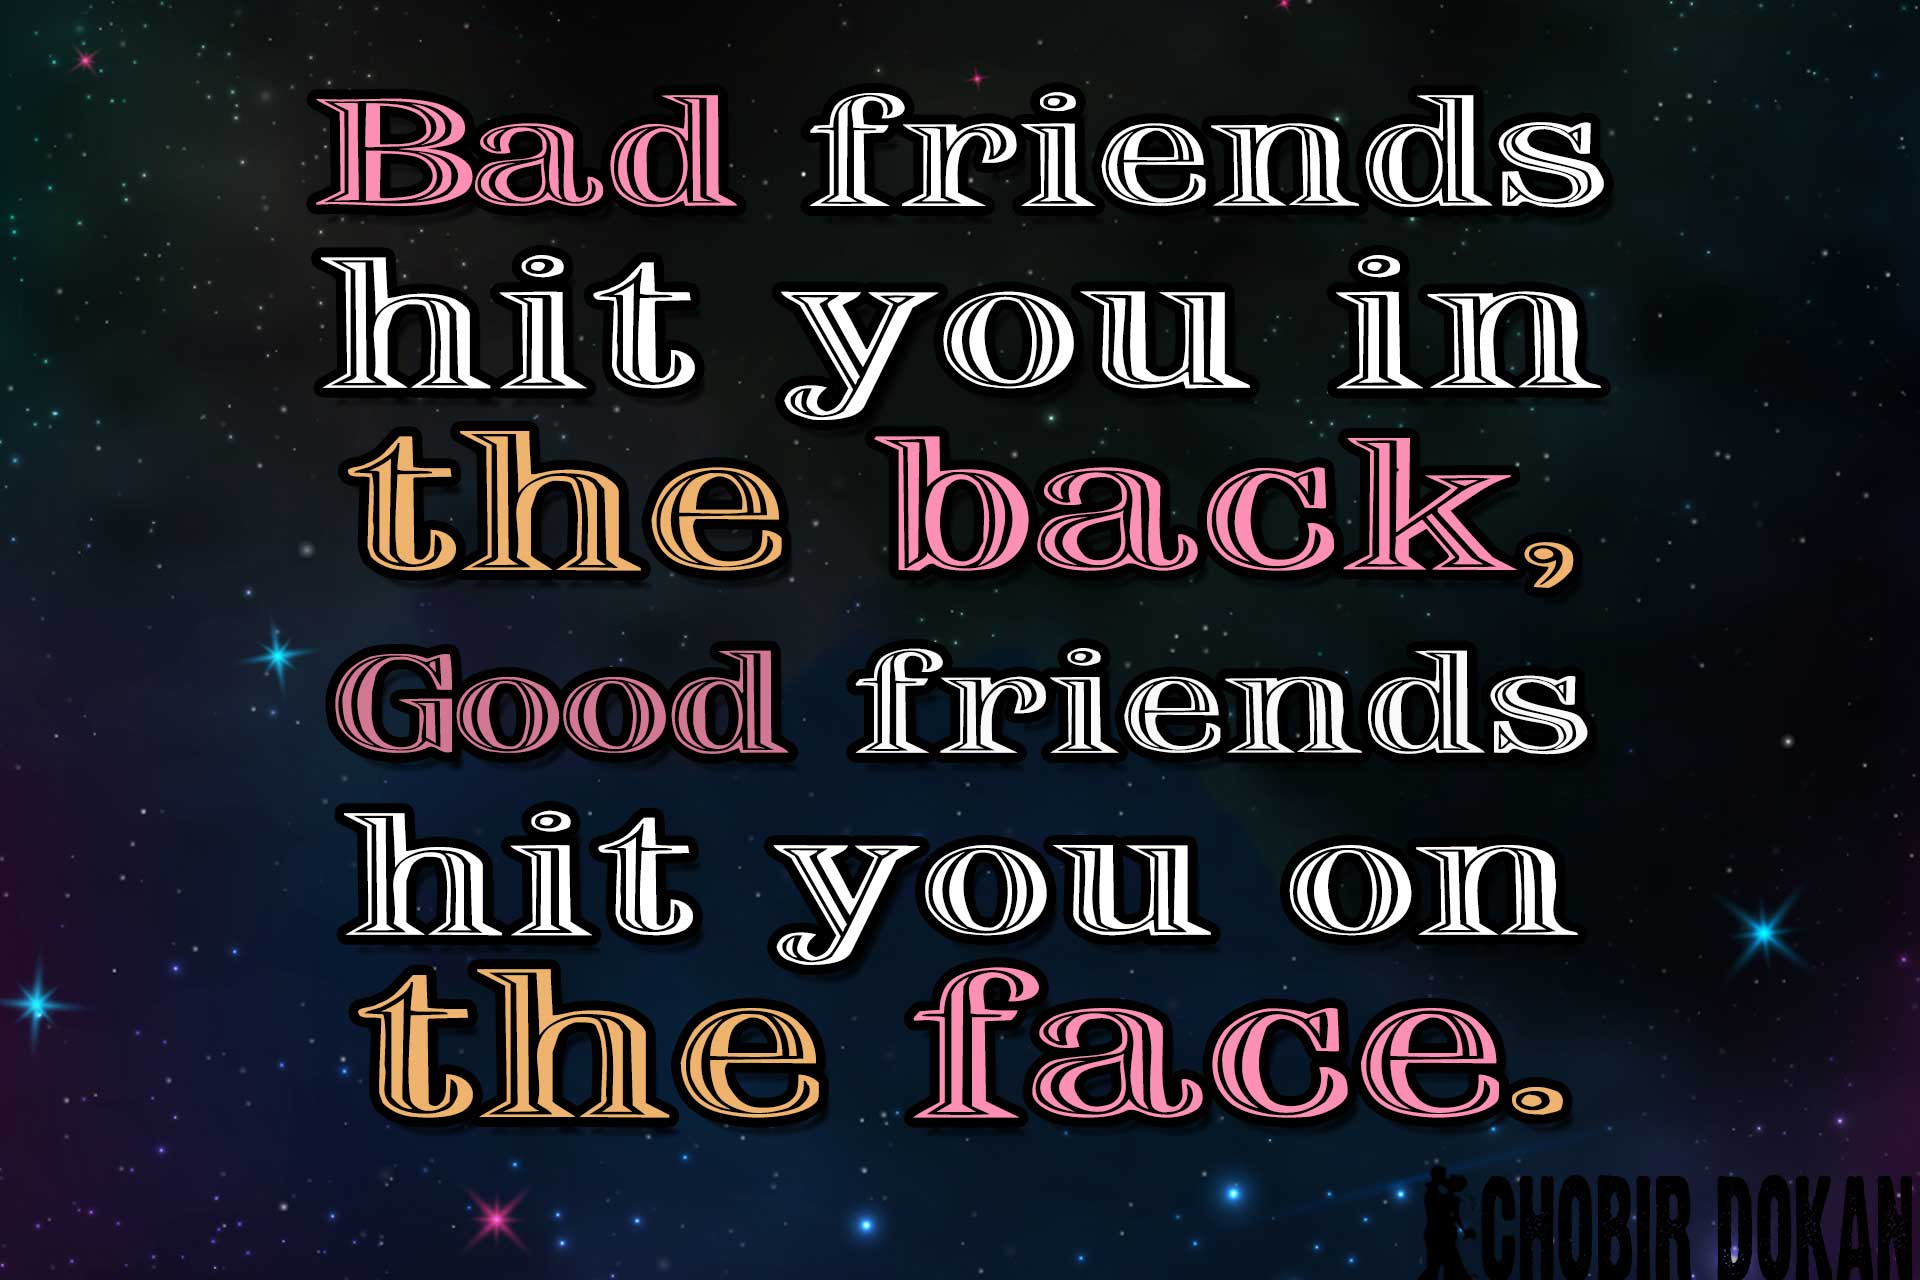 Bad quotes for Friendship. Good friend Bad times обои. Quotations. Good friend bad friend